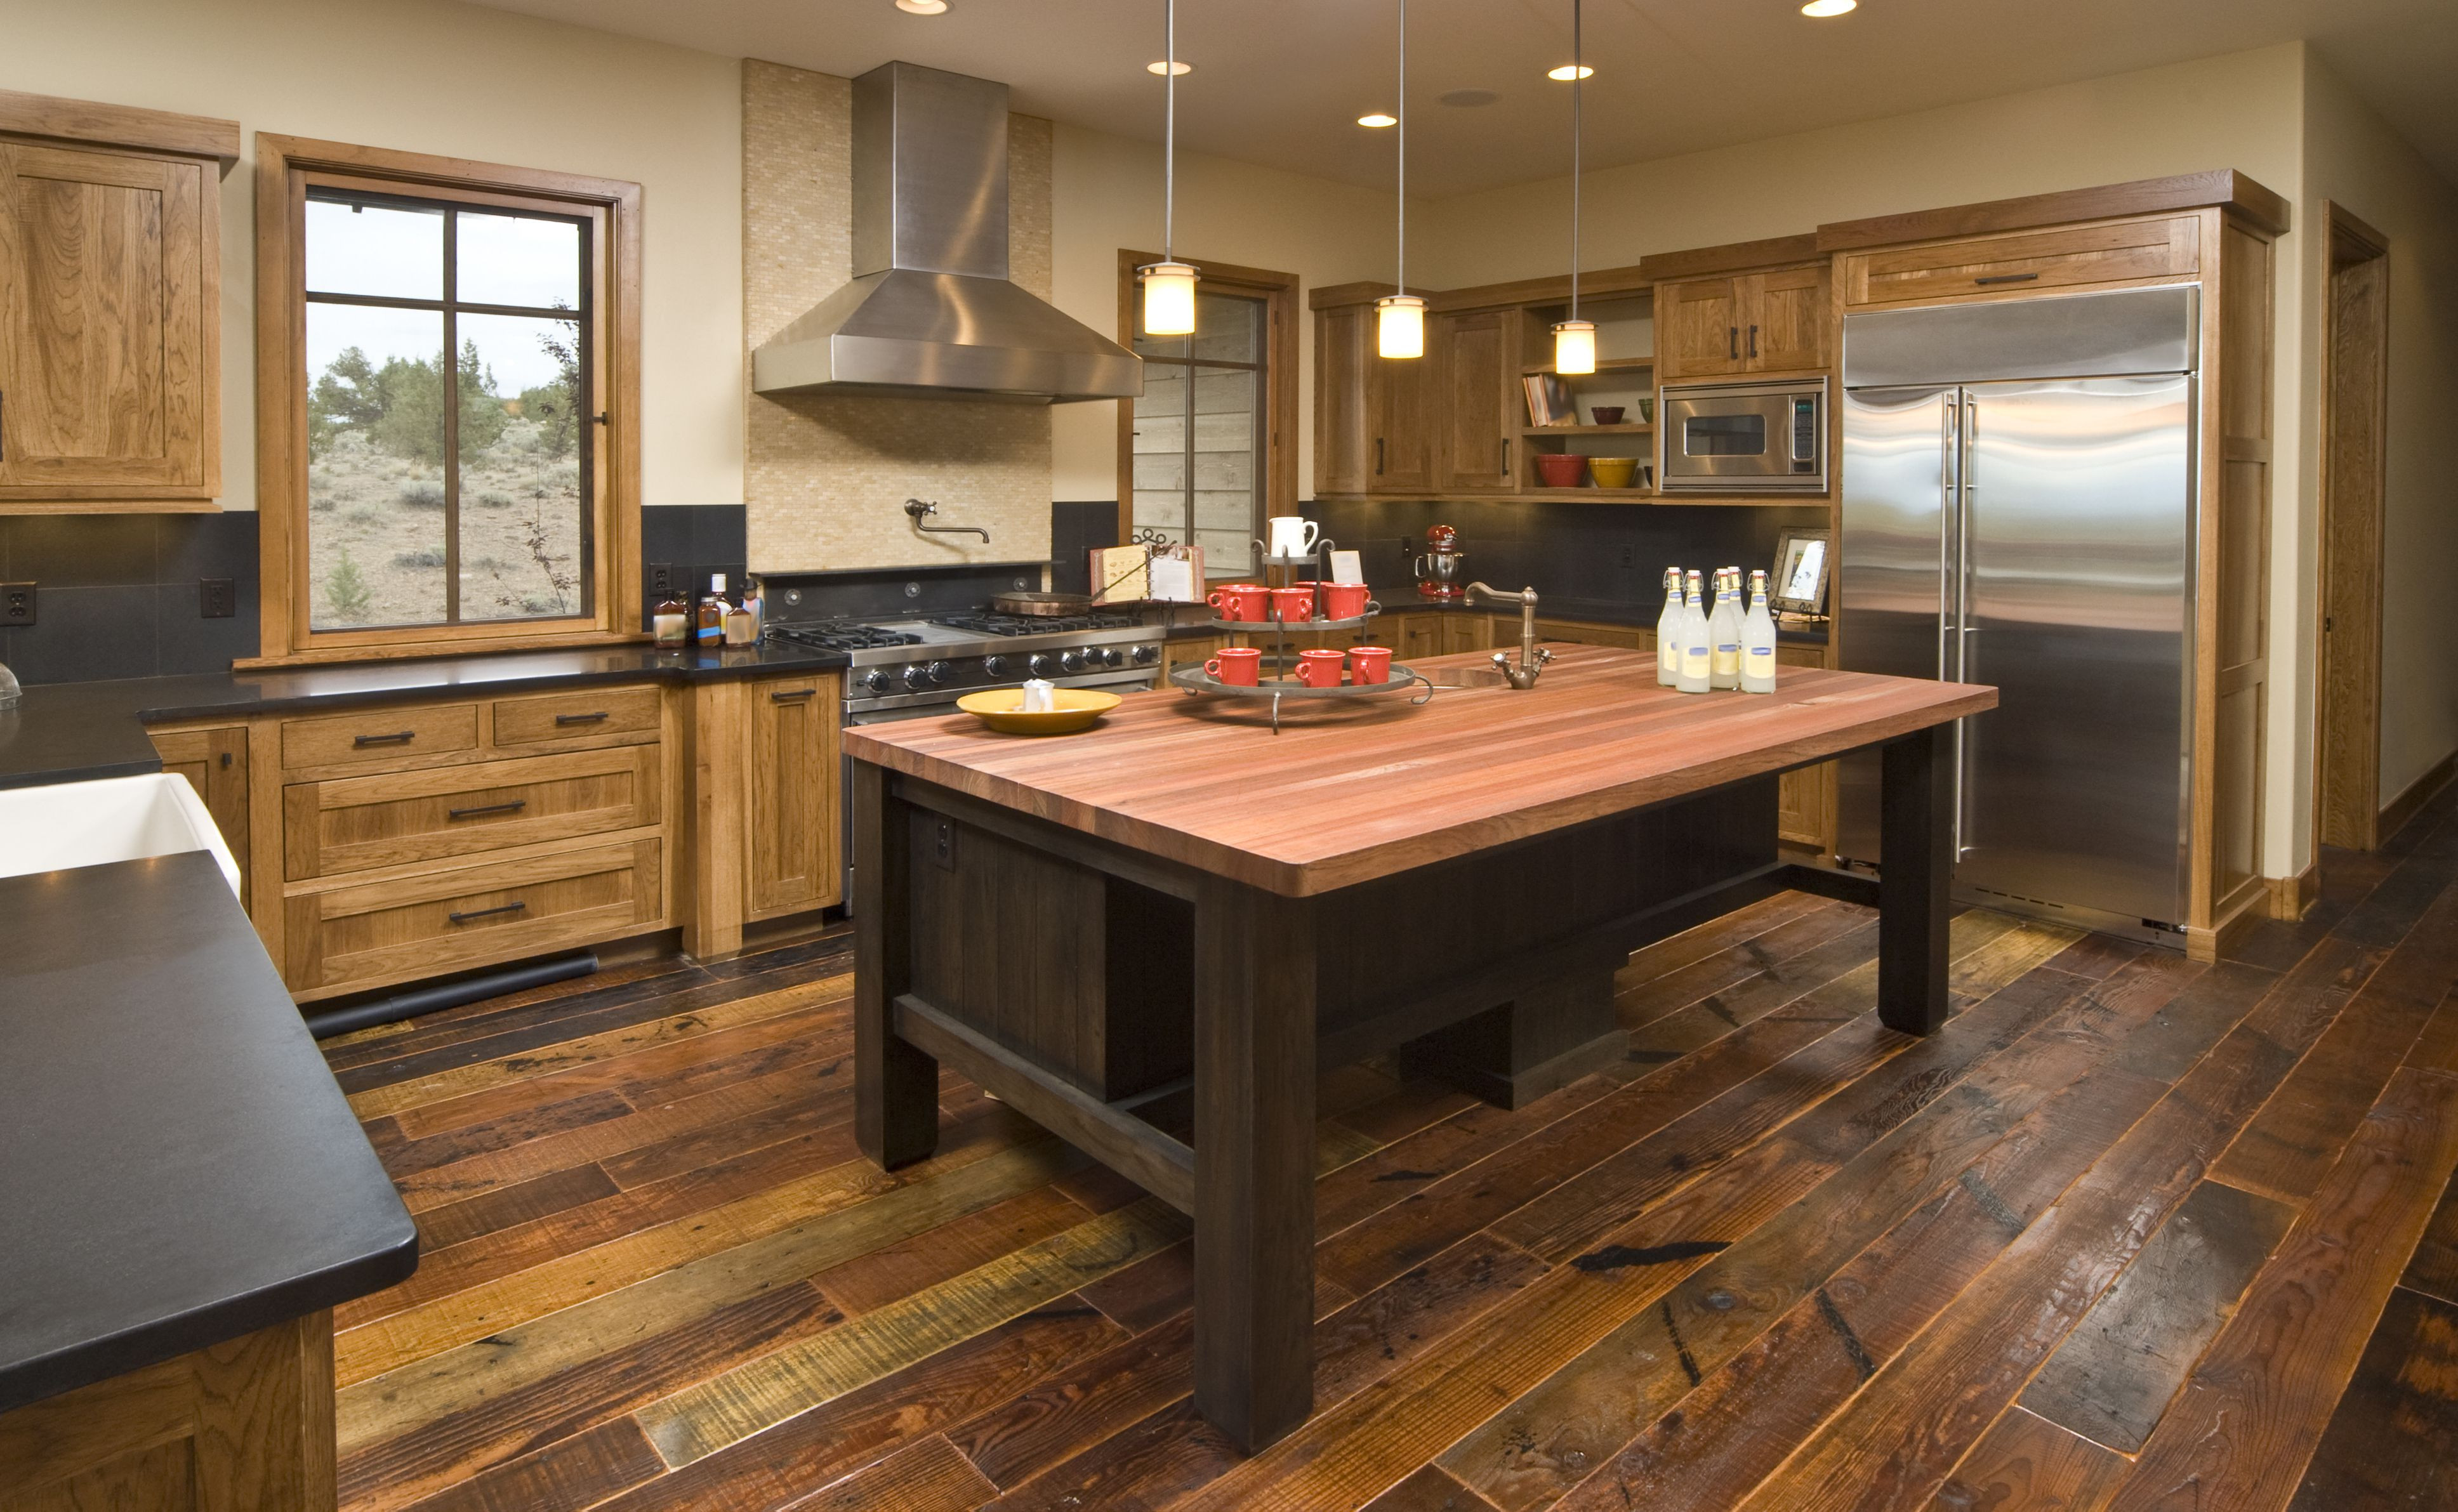 Wide Plank Hardwood Flooring Price Of where to Buy Reclaimed Wood Flooring Throughout Rustic Modern Kitchen 157565456 58ae76a73df78c345ba2f5d1